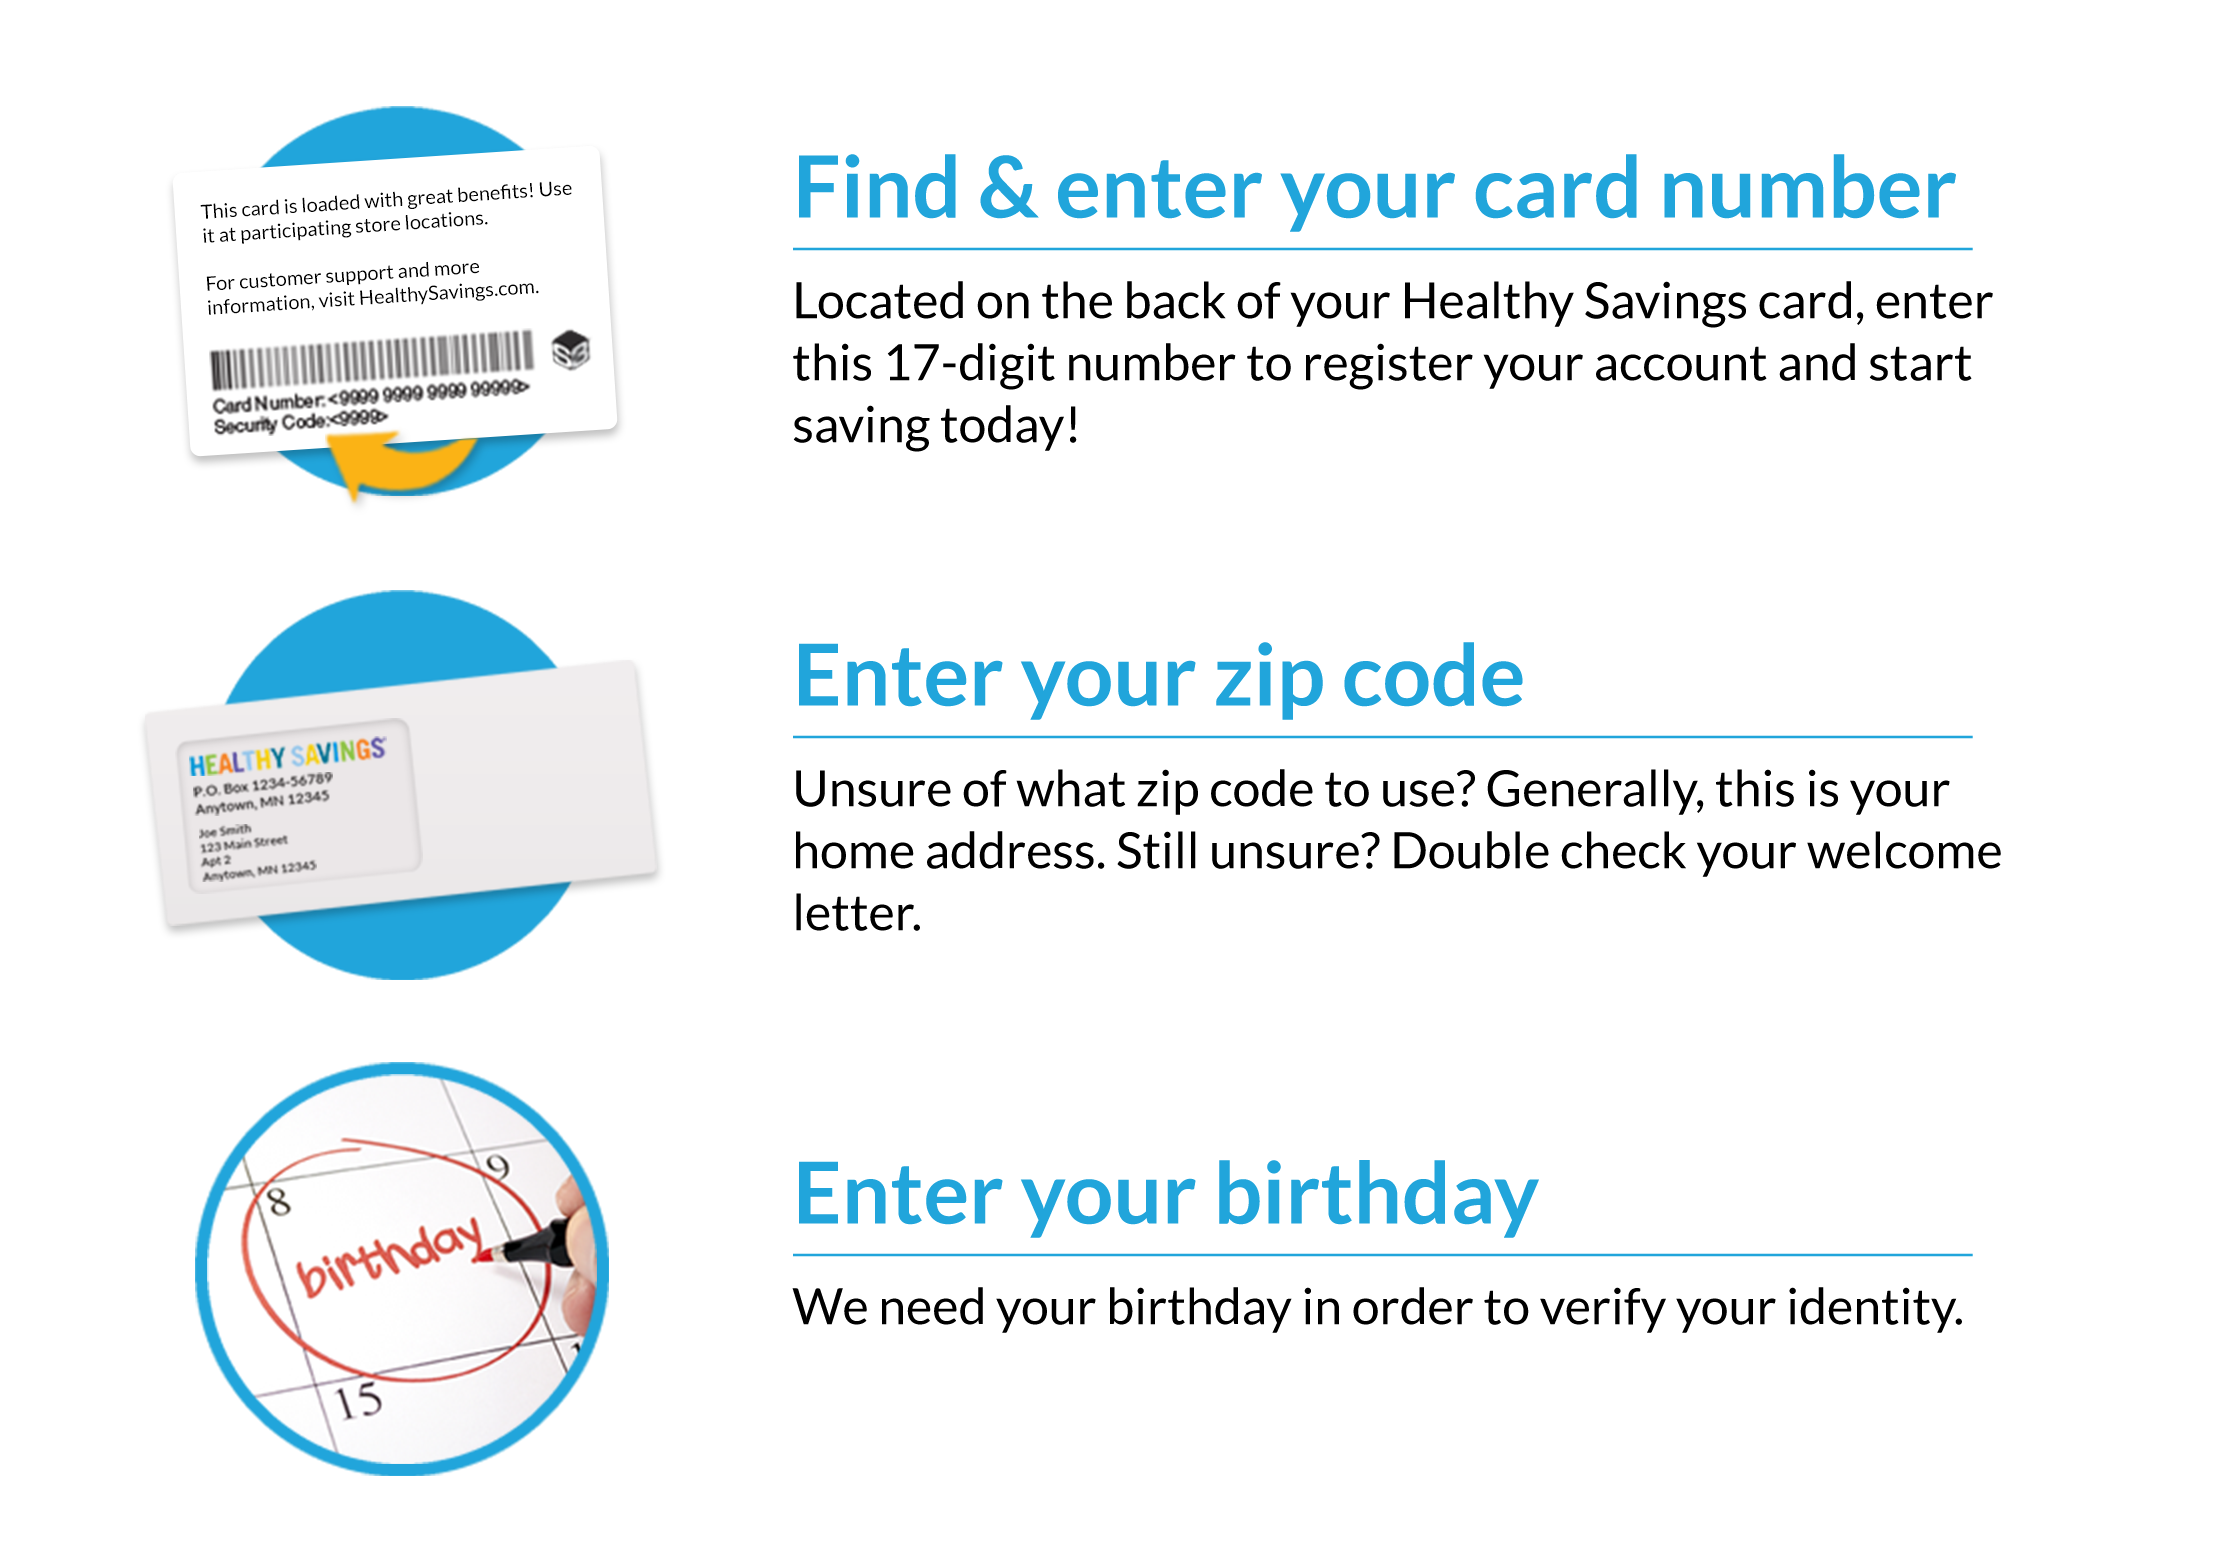 Find and enter your card number. Located on the back of your Healthy Savings card, enter this 17-digit number to register your account and start saving today! Enter you zip code. Unsure of what zip code to use? Generally, this is your home address. Still unsure? Double check your welcome letter. Enter your birthday. We need your birthday in order to verify your identity.